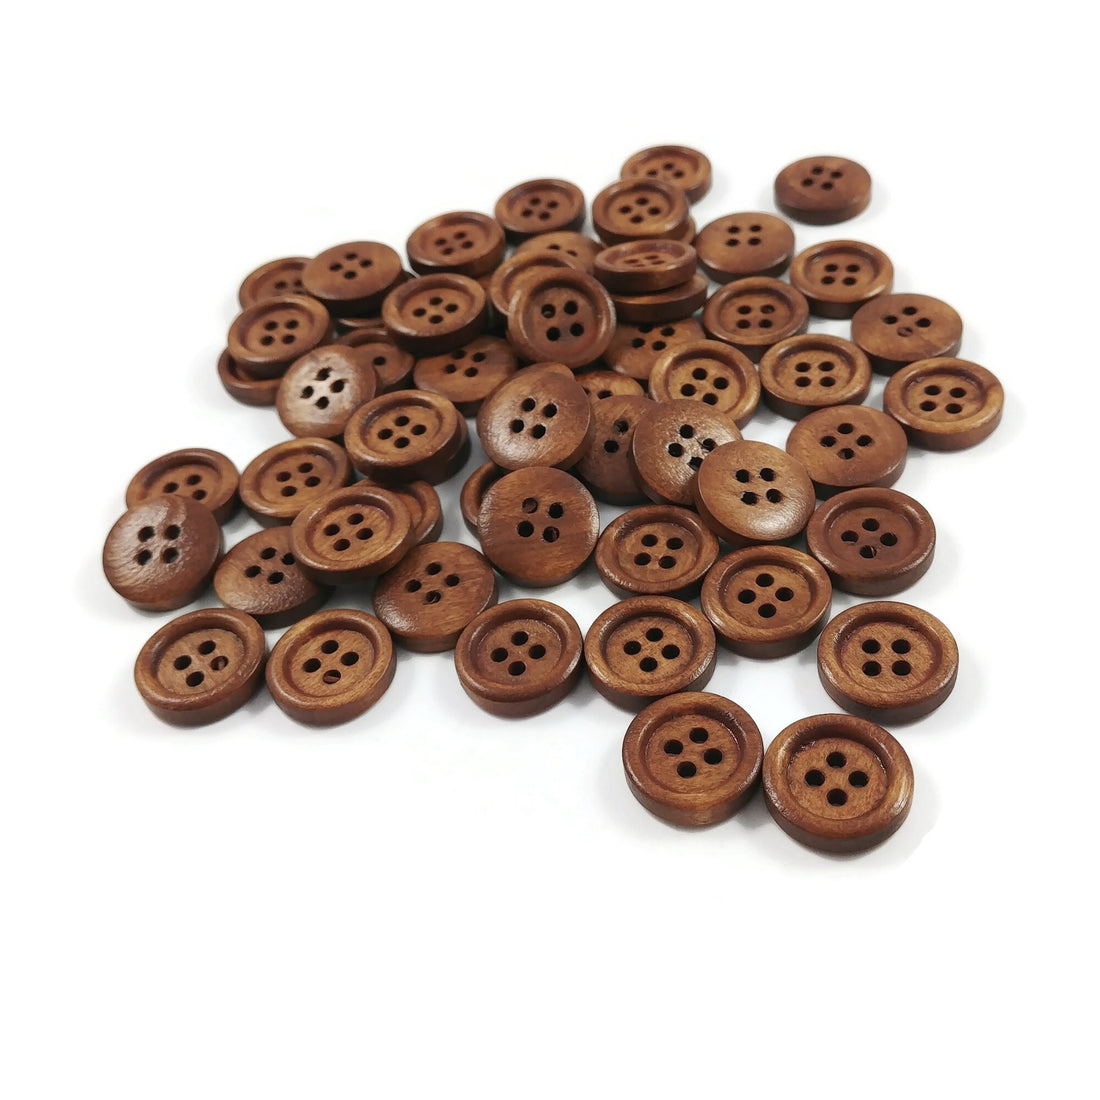 Wholesale Wooden buttons - Brown 4 Holes Wood Sewing Buttons 15mm - set of 60